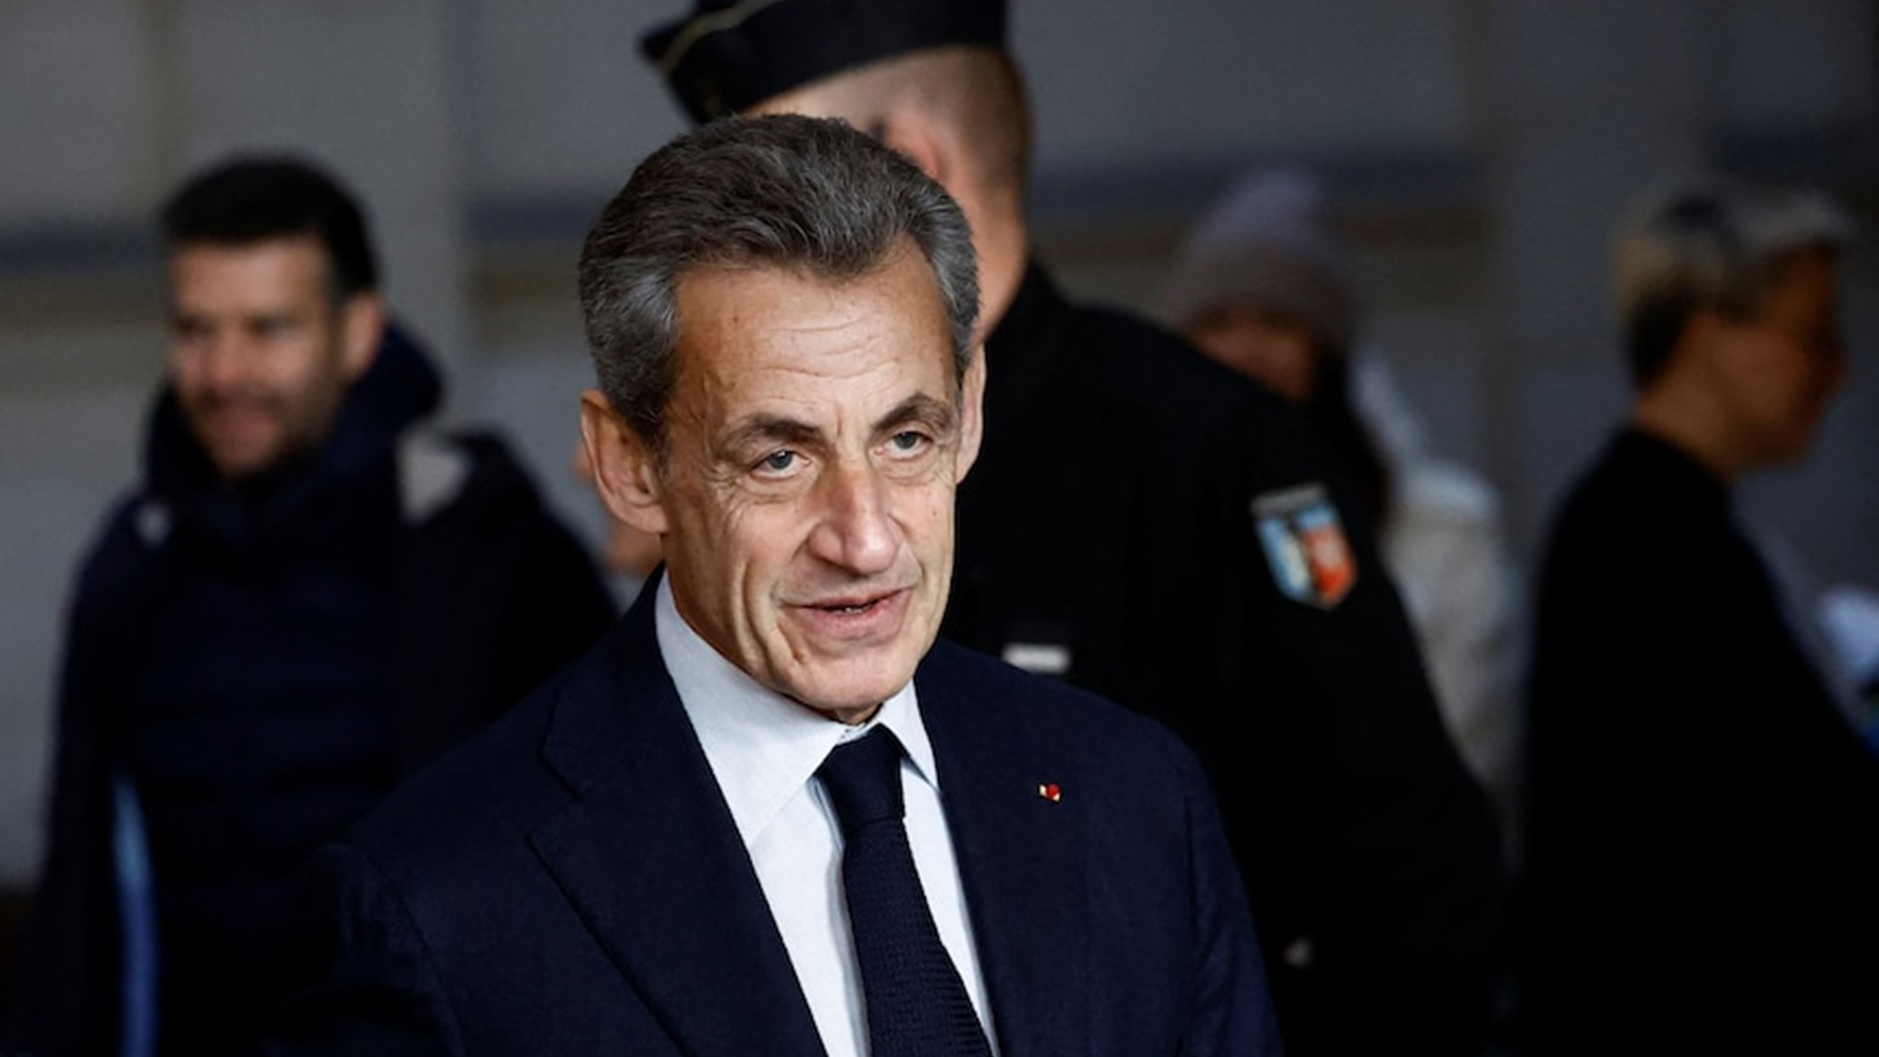 Ex-French President Sarkozy sentenced to one year in prison for illegal campaign financing.